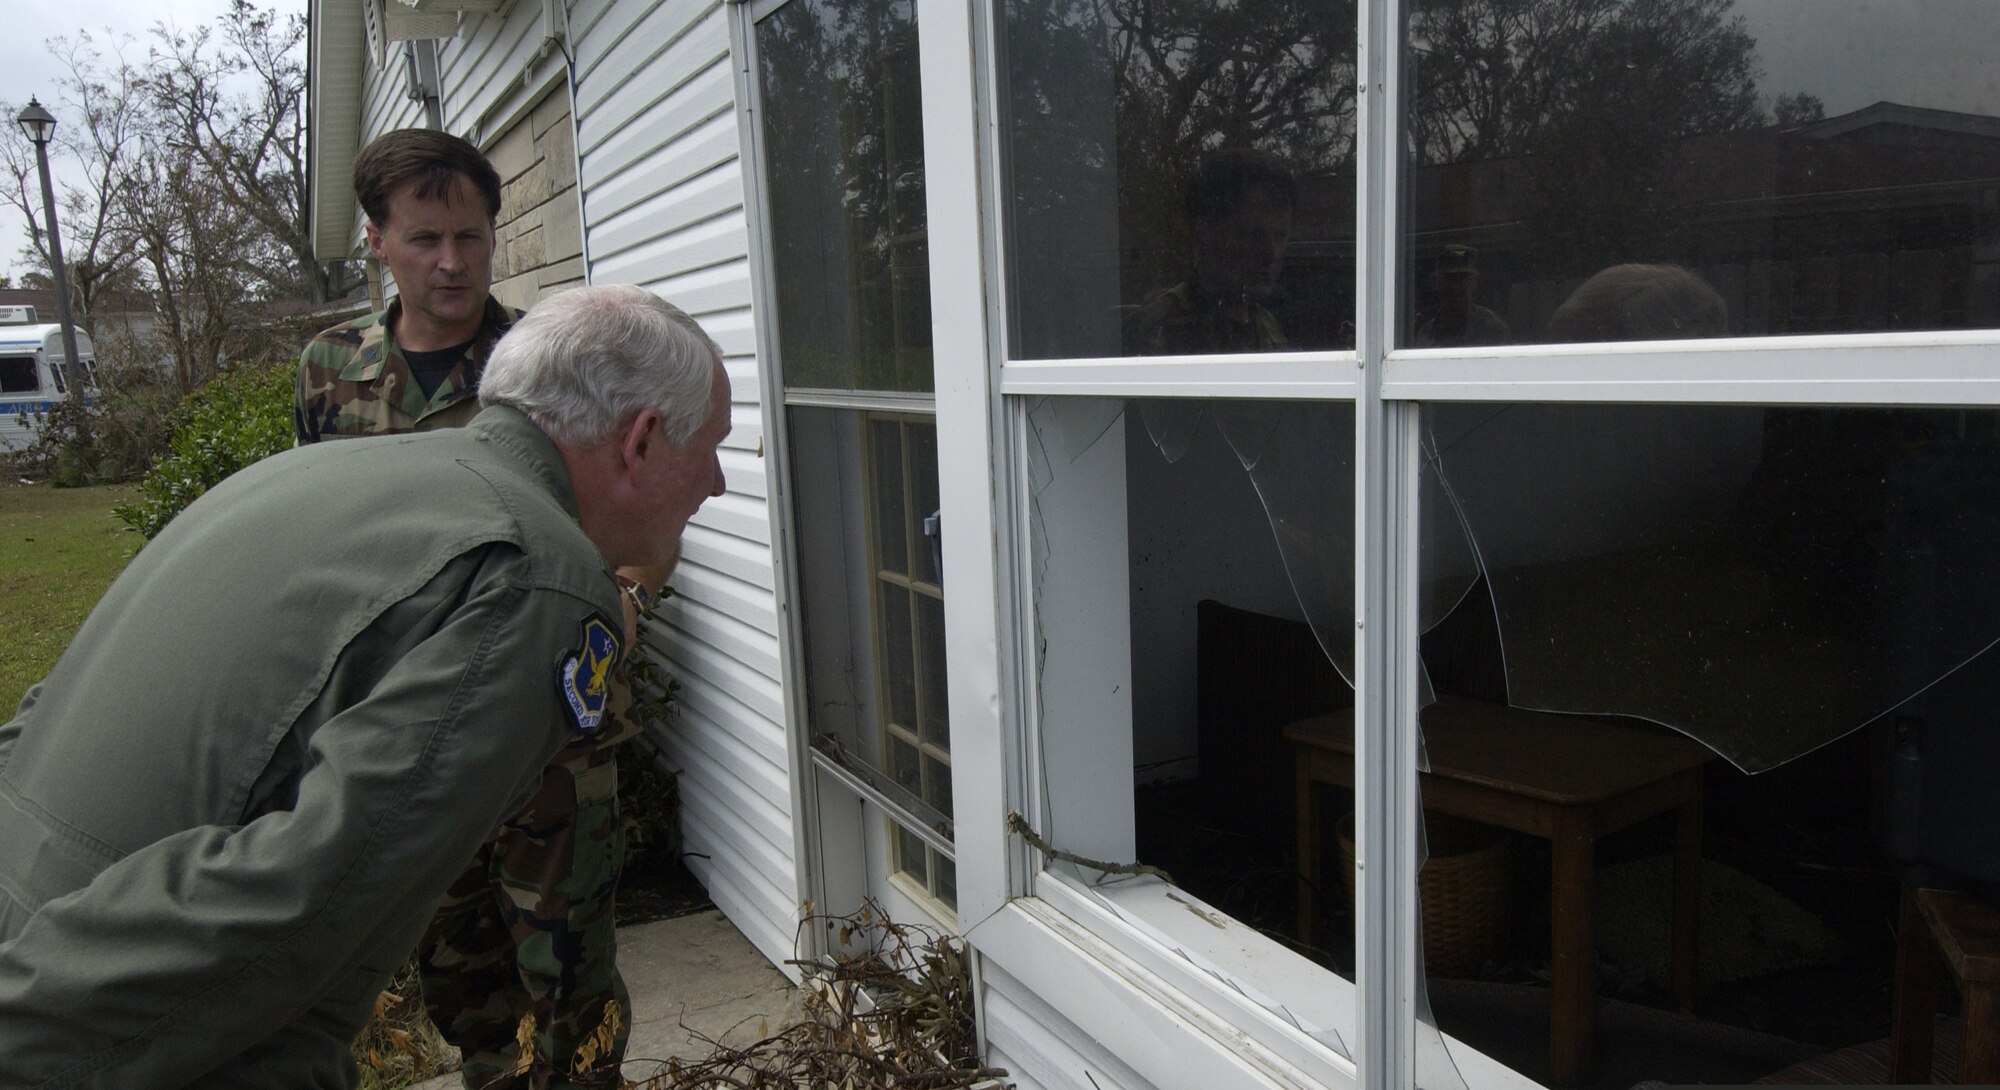 Gen. William R. Looney, III, Air Education and Training Command commander, and Brig. Gen. William T. Lord, 81st Training Wing commander, look into a damaged home in Keesler Air Force Base’s military family housing area. The general made a trip to the base Thursday to assess the hurricane damage first-hand. (Photo by TSgt Jennifer C. Wallis, 1st Combat Camera Squadron)